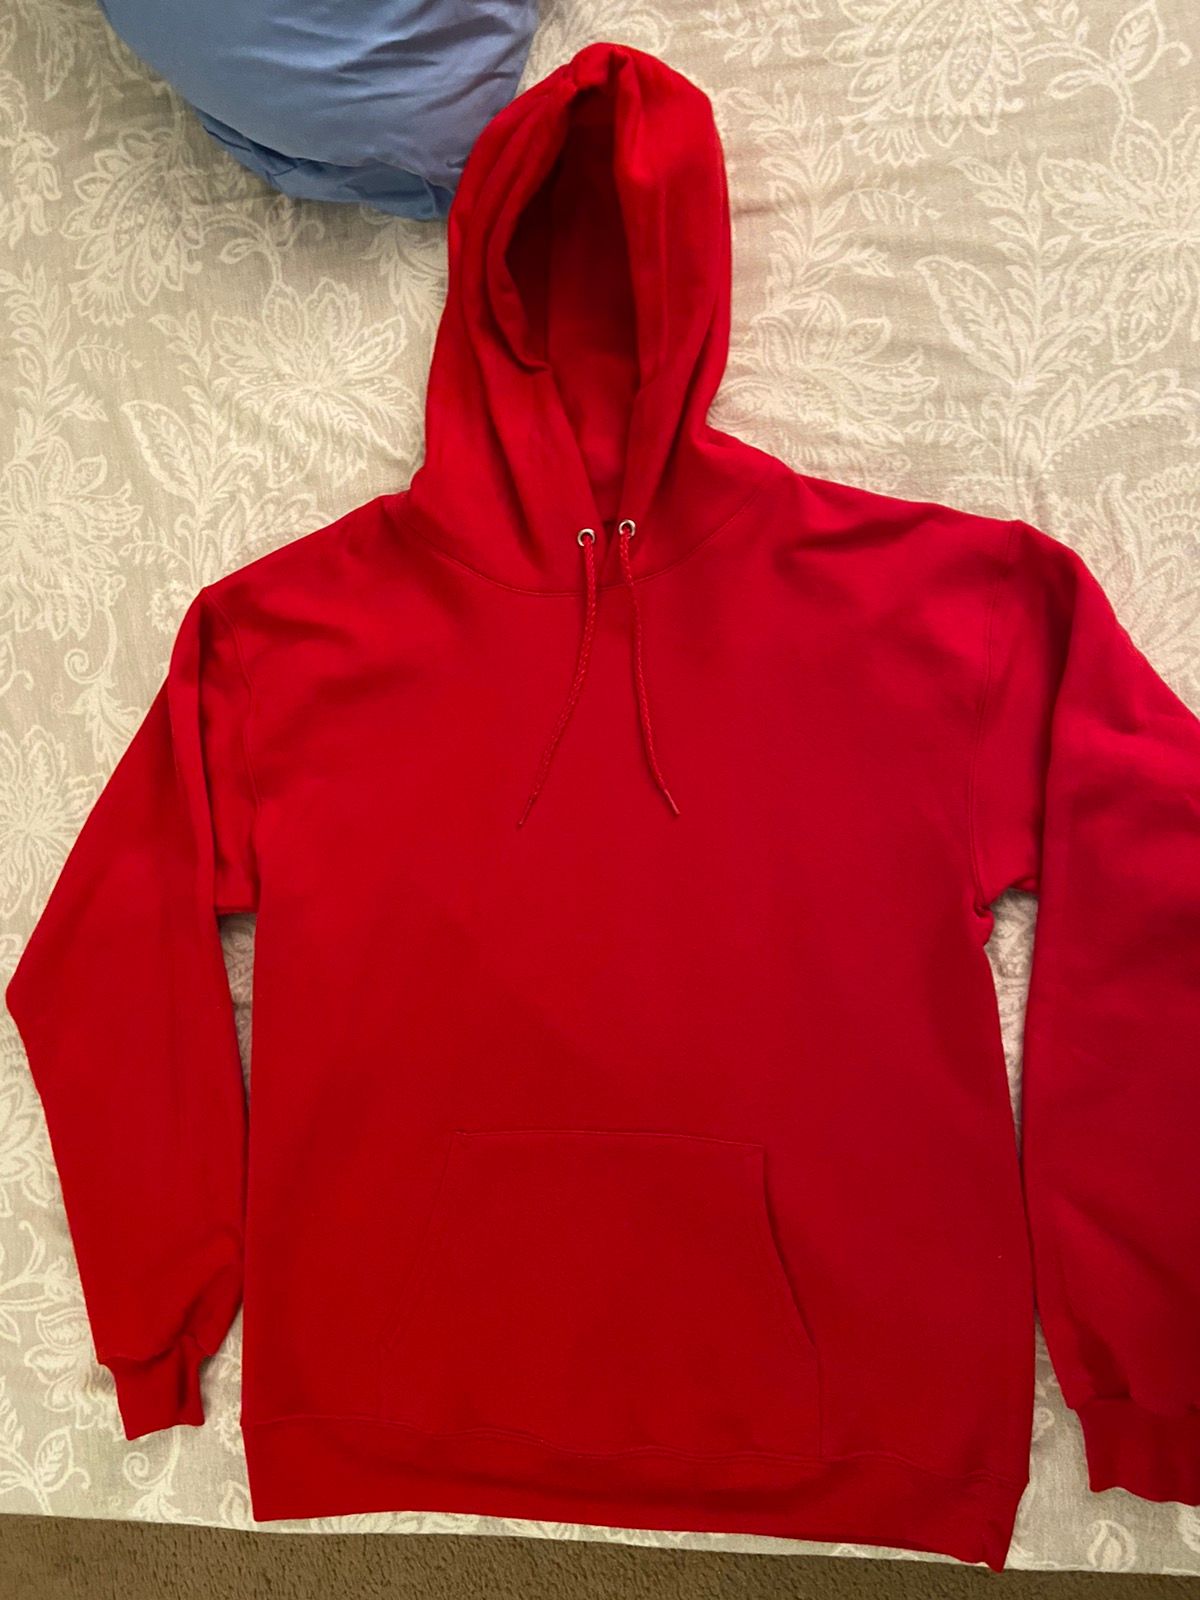 Hanes Hanes Red Blank Hoodie Size US M / EU 48-50 / 2 - 1 Preview